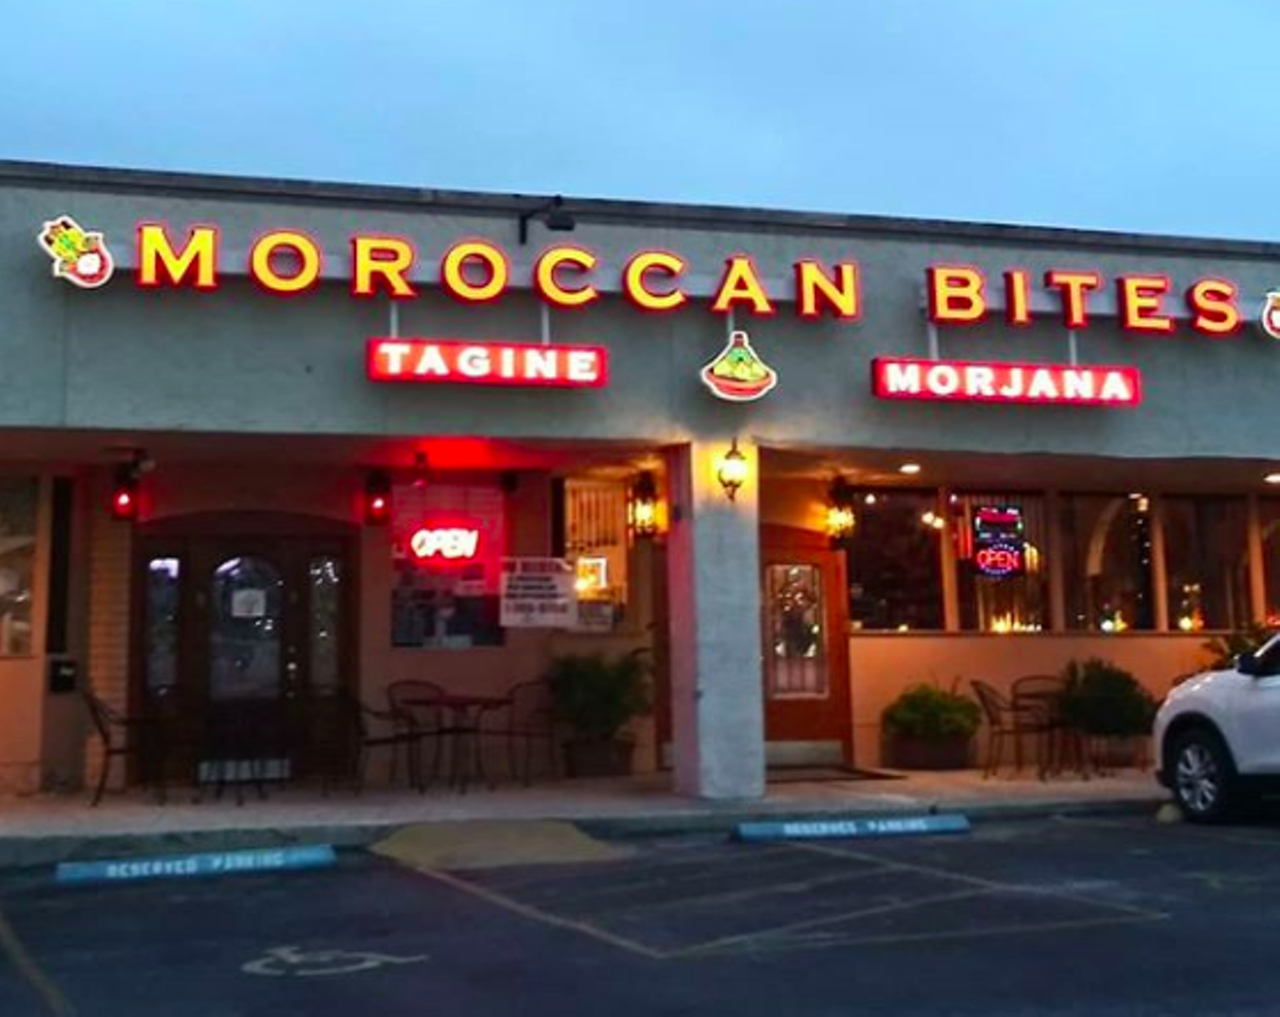 Moroccan Bites Tagine
5714 Evers Road, (210) 706-9700, moroccanbitestagine.com
Guy Fieri brought his Diners, Drive-Ins and Dives to San Antonio in season 12 for the “From Kraut to Couscous” episode. Over at Moroccan Bites, Fieri was all about couscous at the family-run restaurant.
Photo via Instagram / irishninjafit